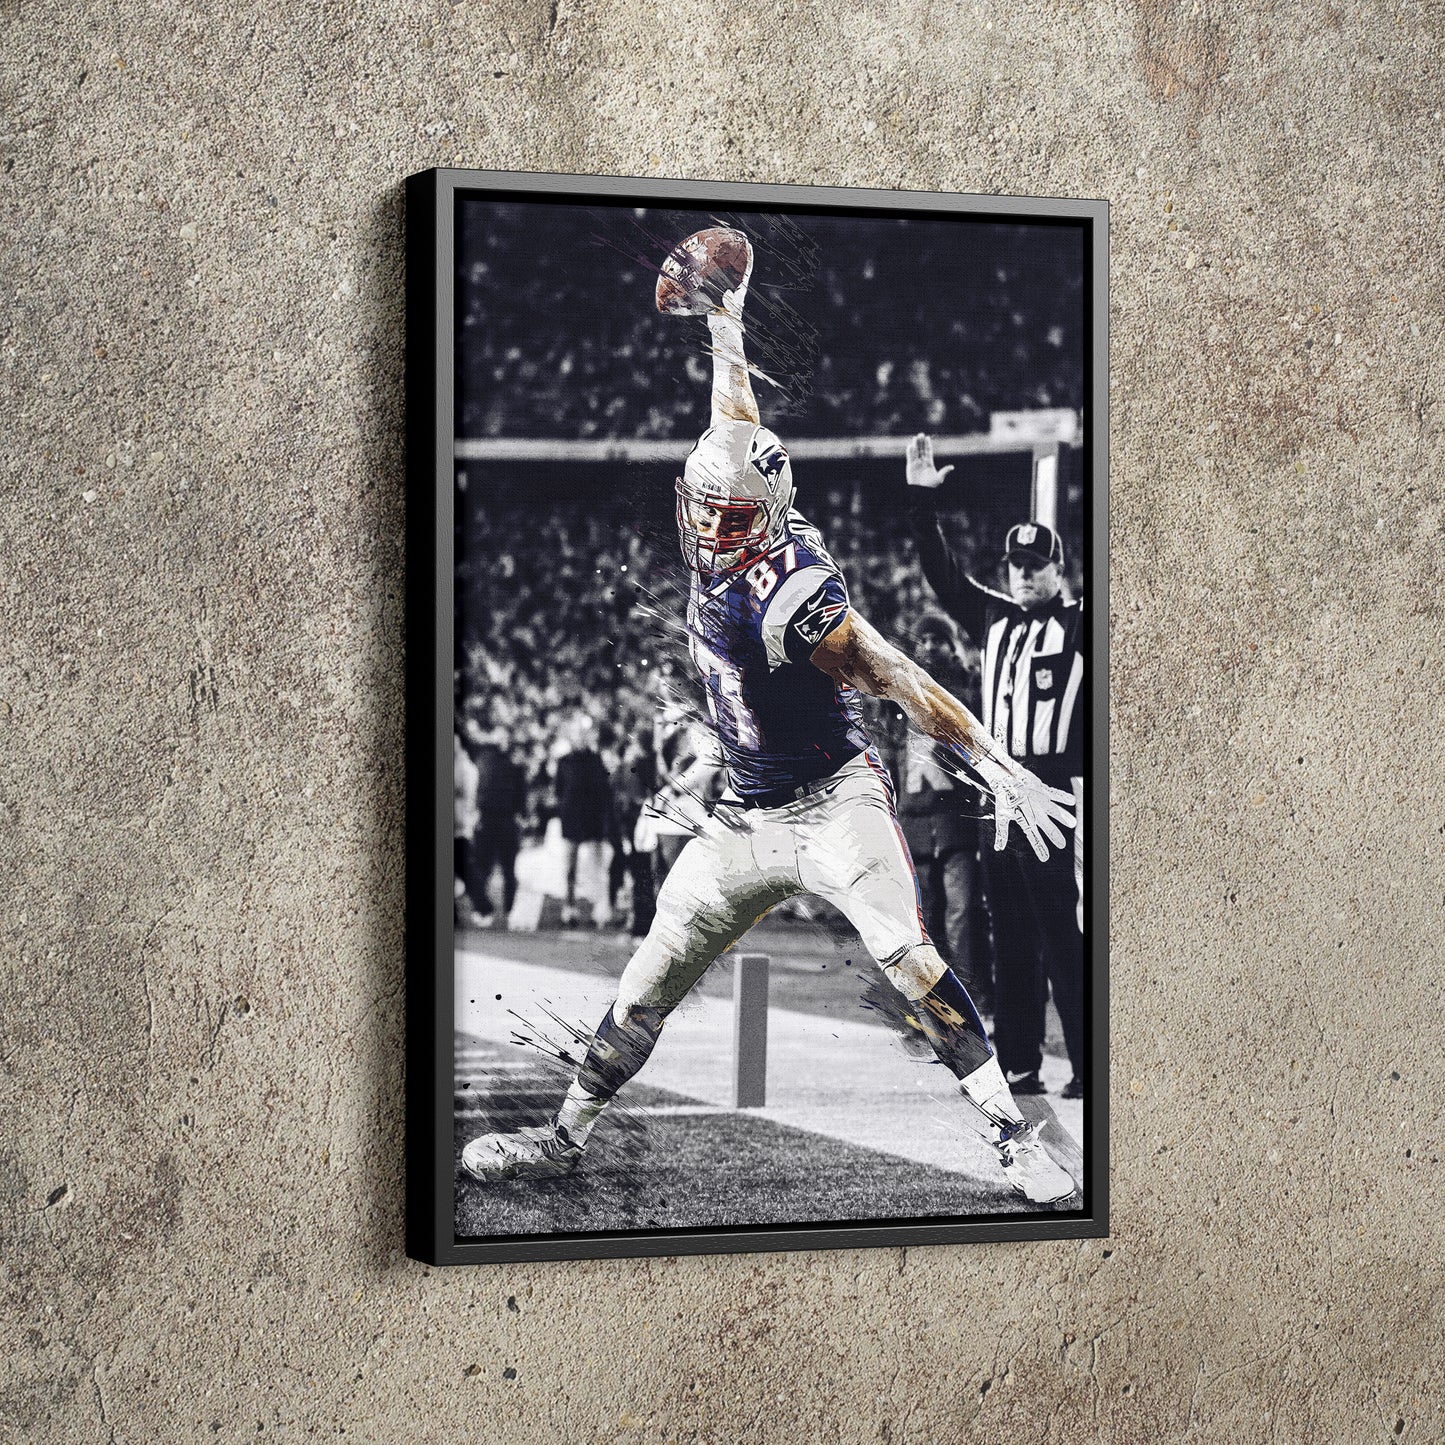 Rob Gronkowski Spiking the Ball Poster New England Patriots Football Hand Made Posters Canvas Print Kids Wall Art Man Cave Gift Home Decor